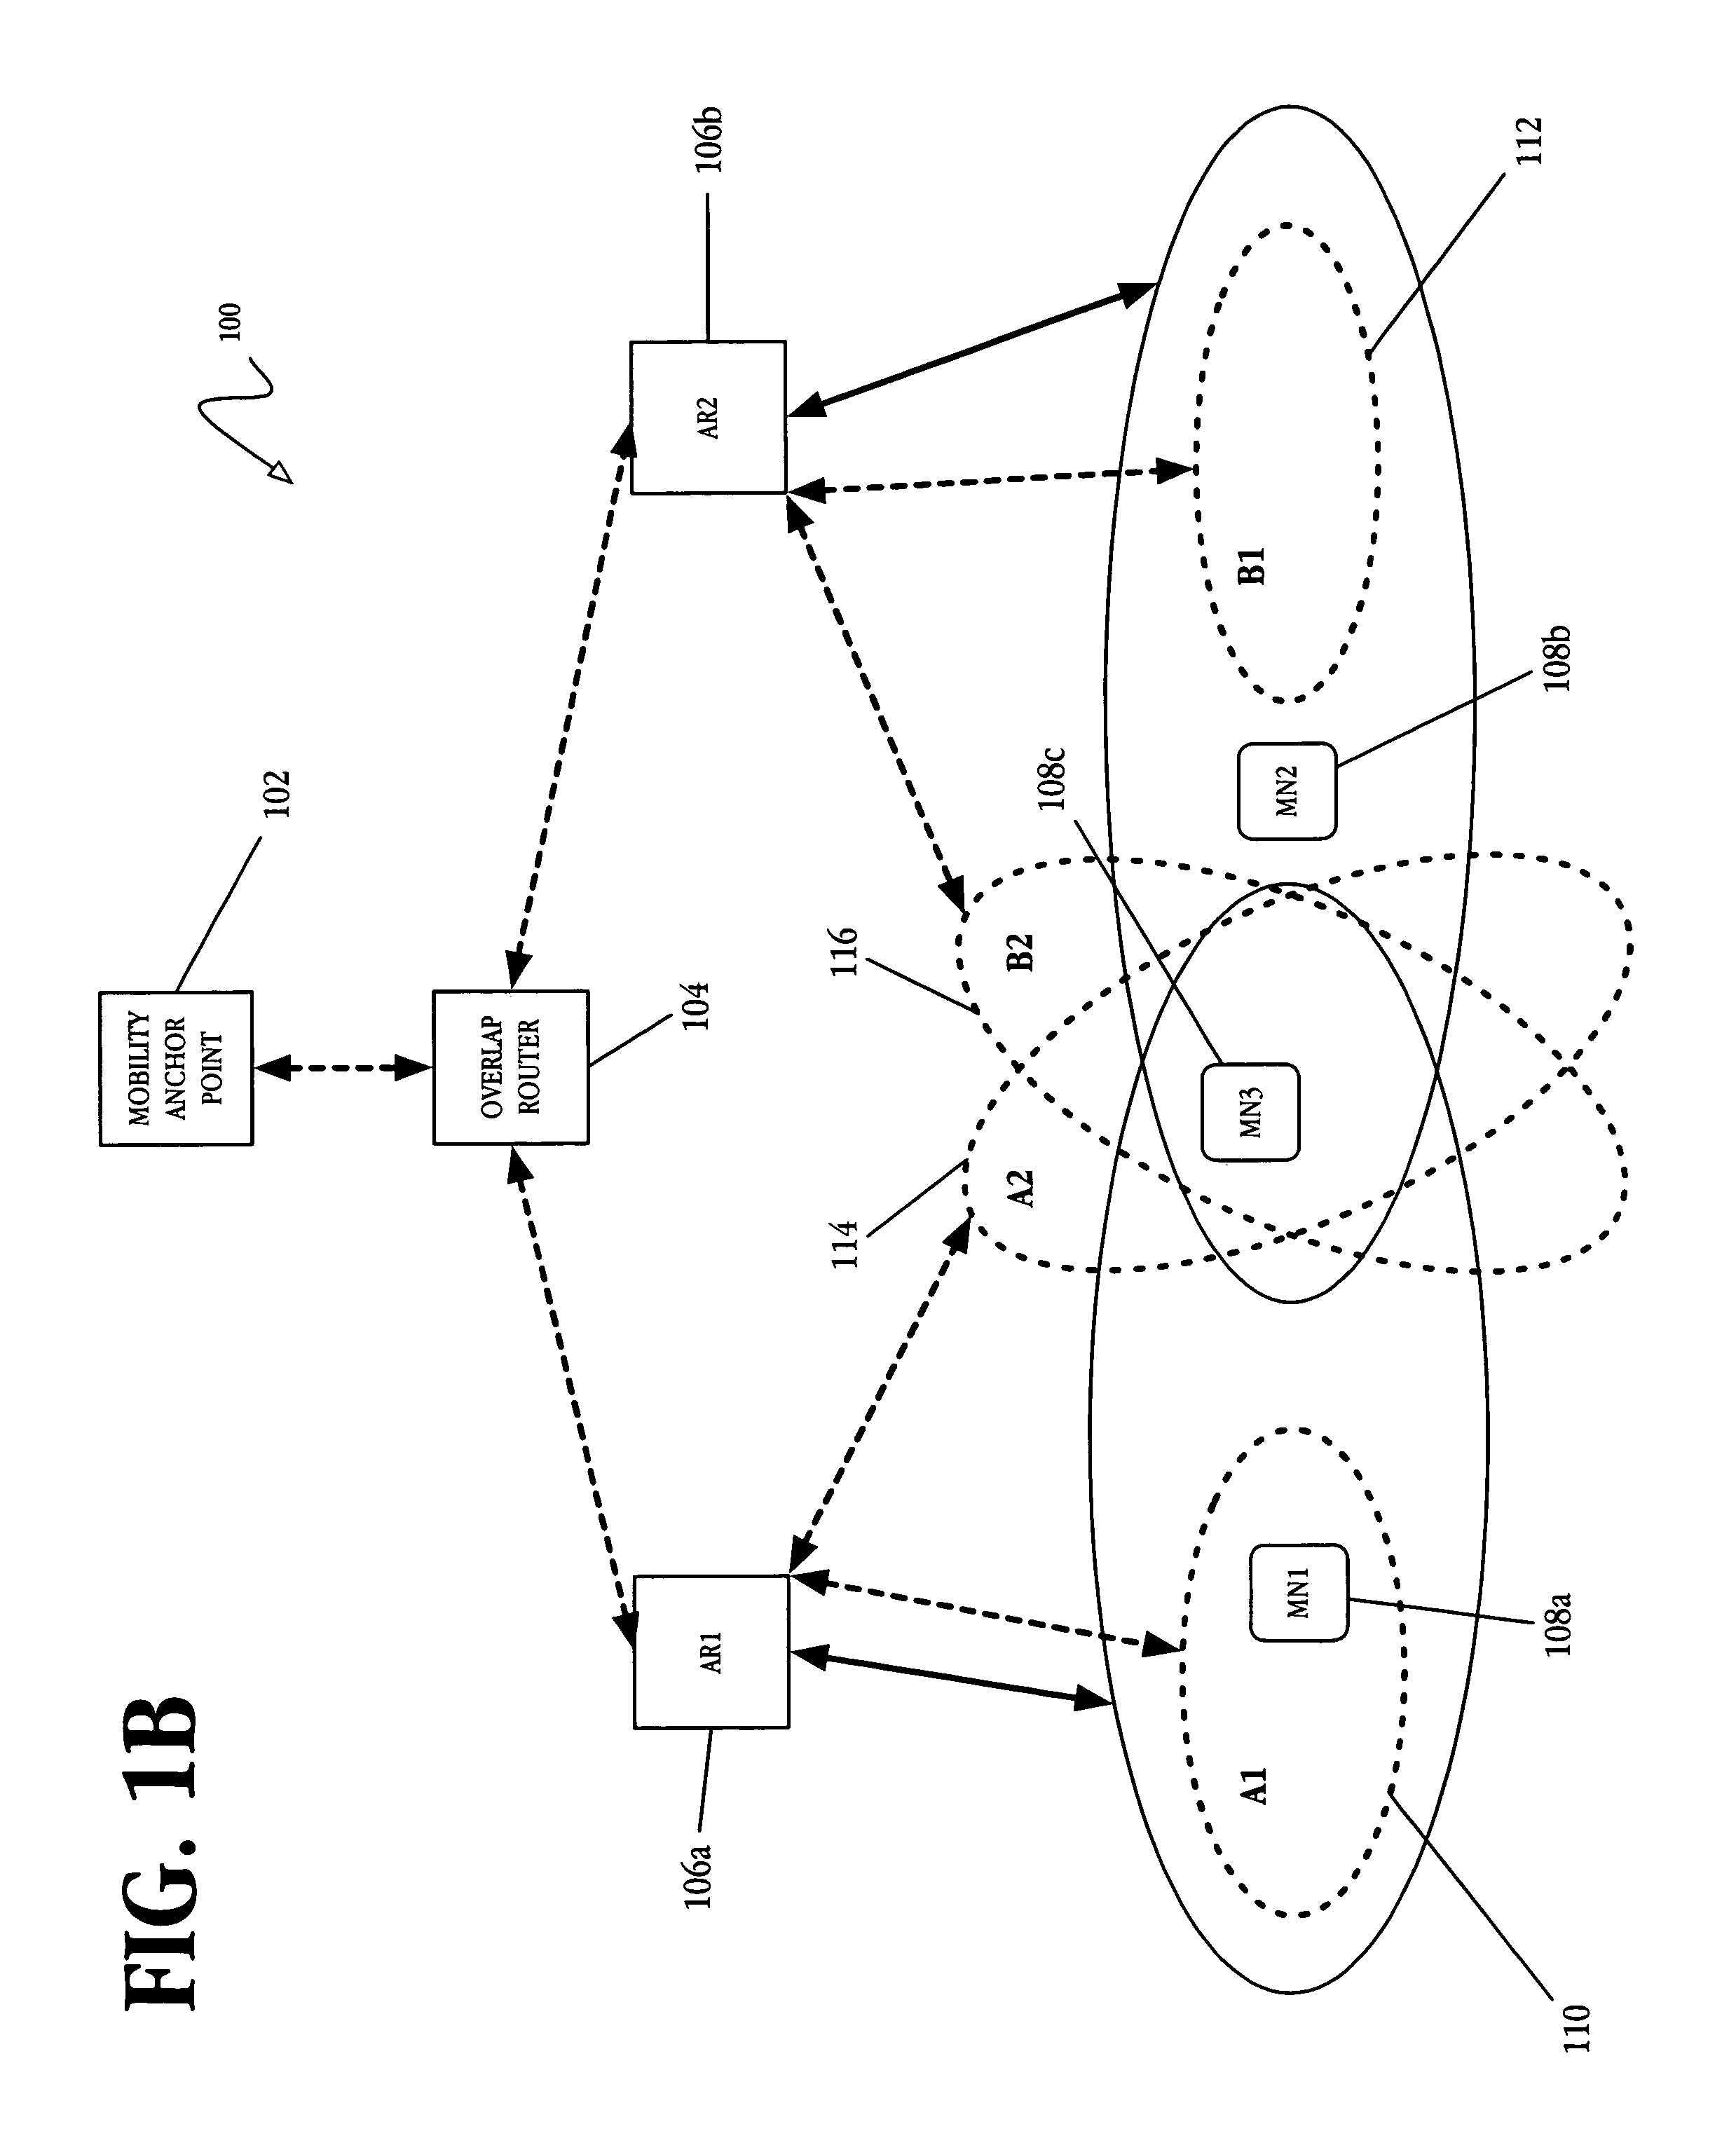 Systems and methods for increased mobility among mobile nodes in a wireless network